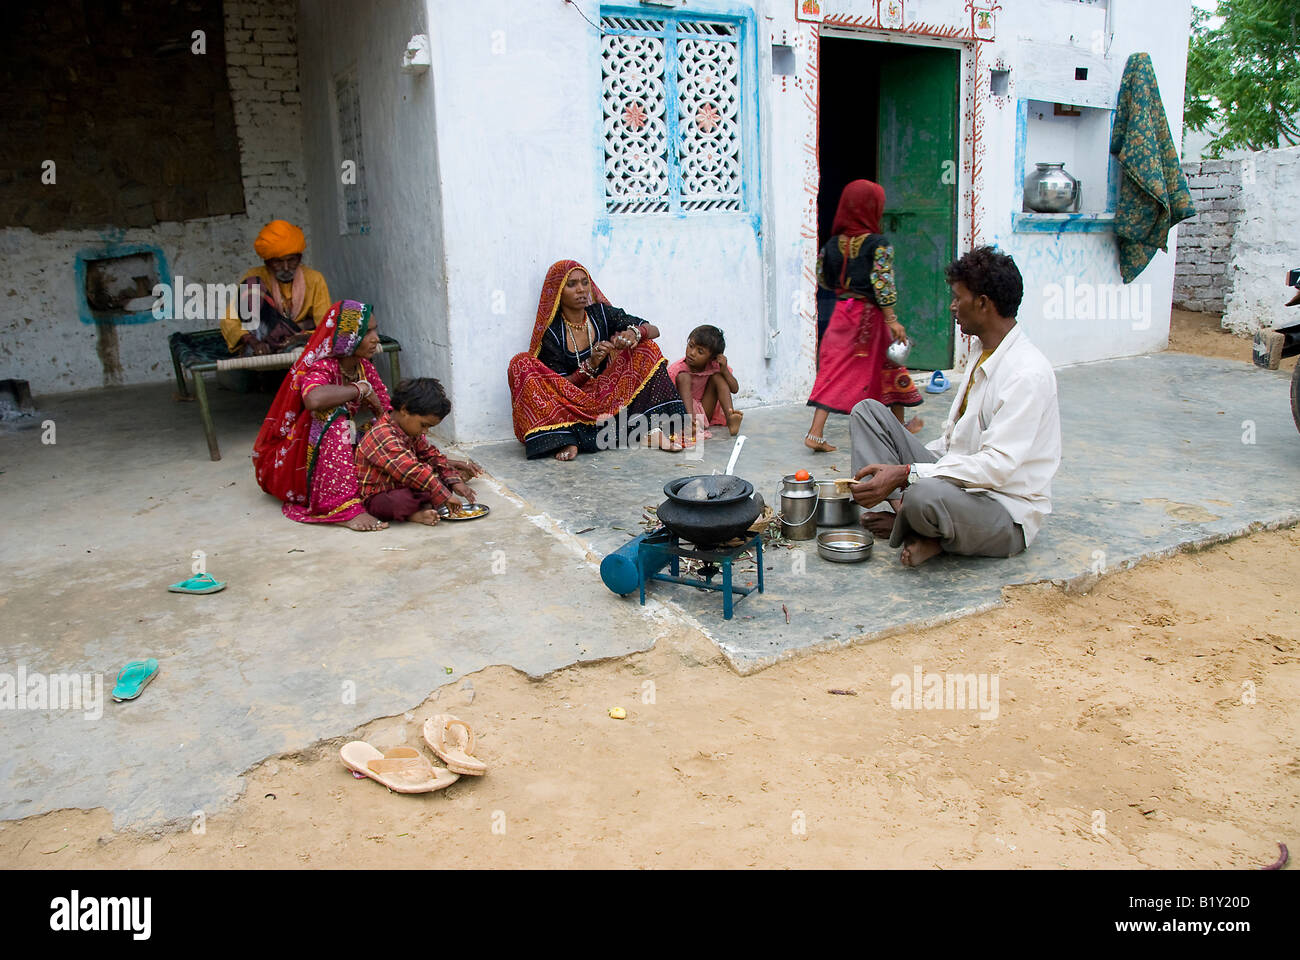 Family cooking food in courtyard of a house in Rajasthan, India. Stock Photo